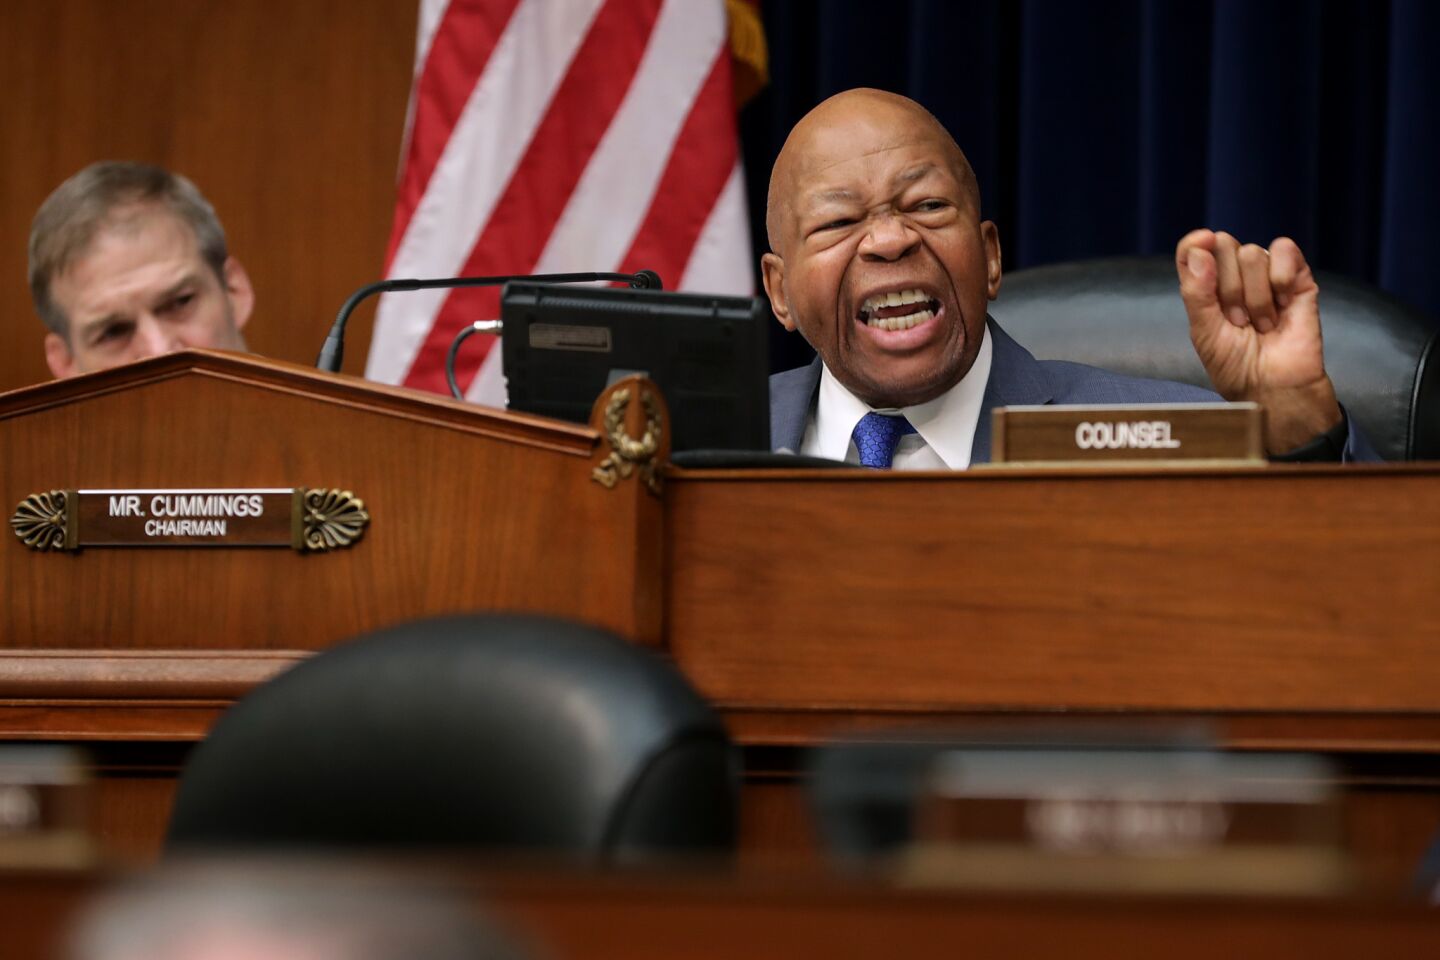 House Oversight and Reform Committee Chairman Elijah Cummings (D-Md.) makes closing remarks after testimony from Michael Cohen.